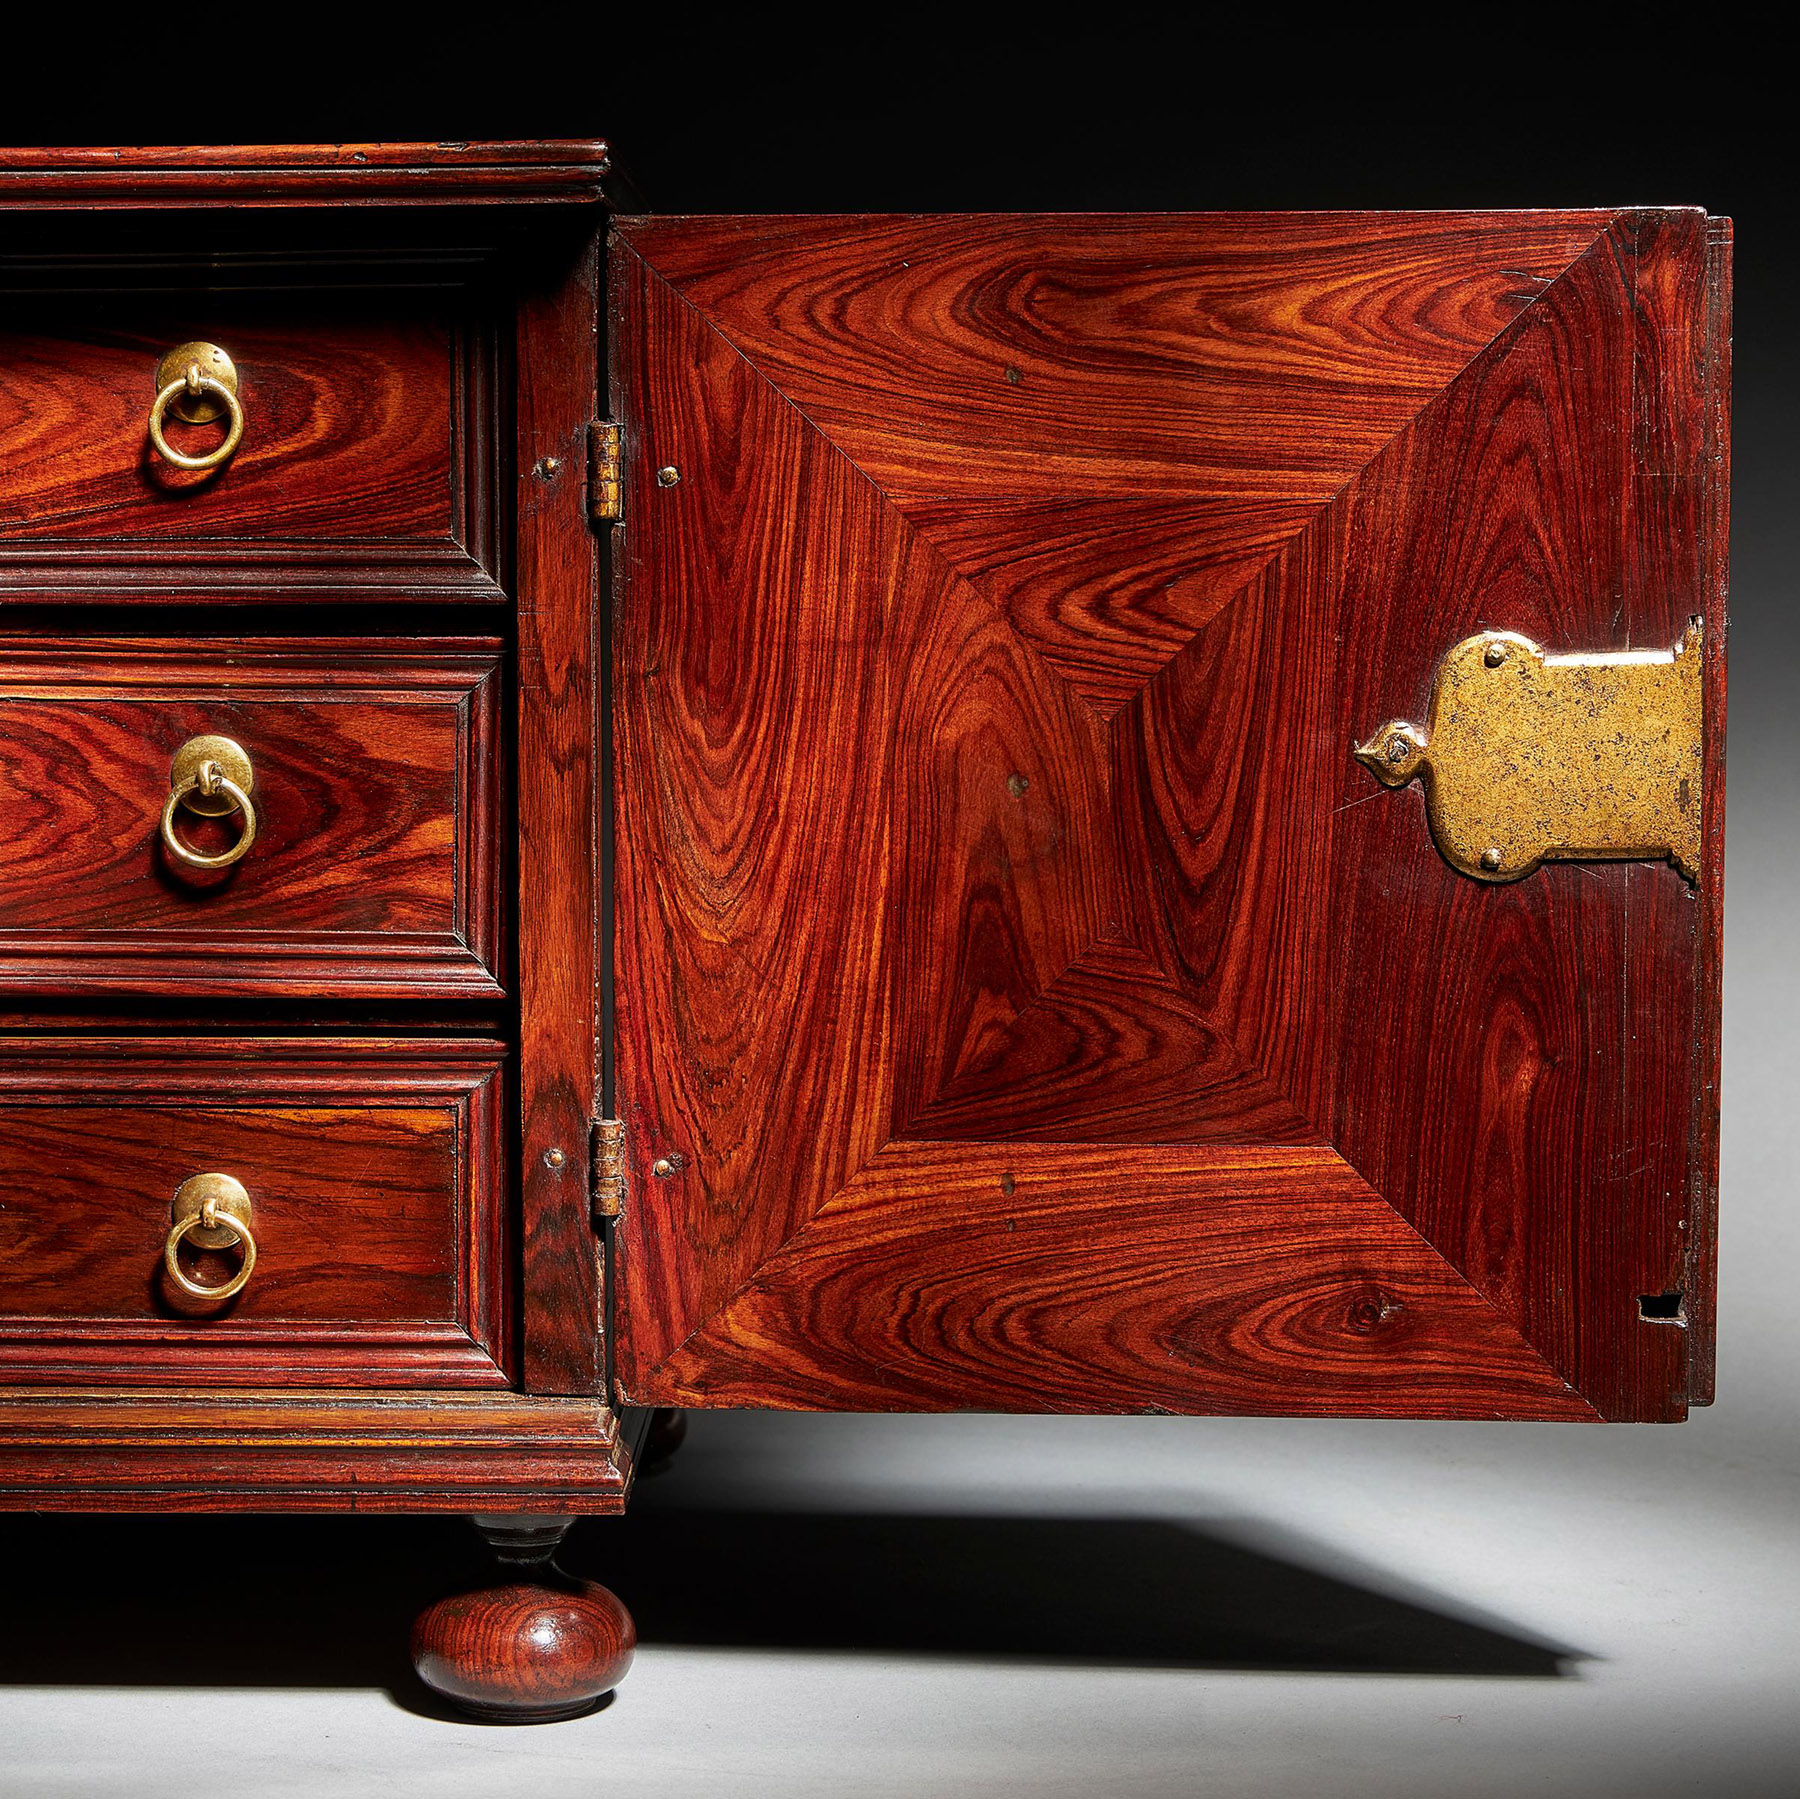 Extremely Rare and Fine Miniature Kingwood Table Cabinet from the Reign of Charles II 16